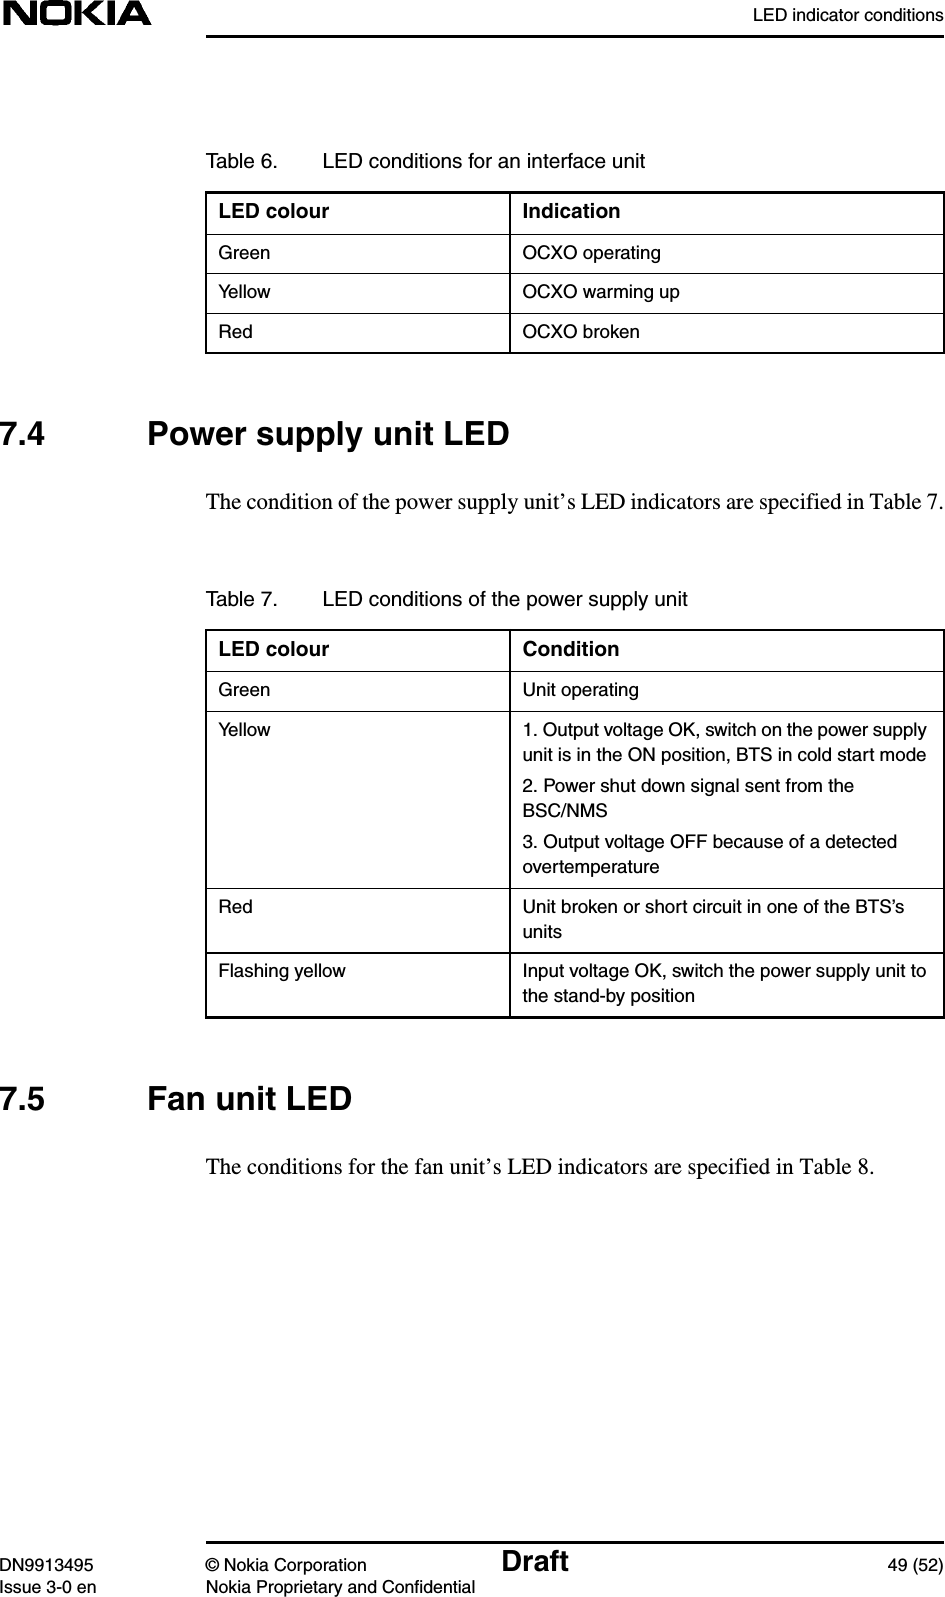 LED indicator conditionsDN9913495 © Nokia Corporation Draft 49 (52)Issue 3-0 en Nokia Proprietary and Confidential7.4 Power supply unit LEDThe condition of the power supply unit’s LED indicators are specified in Table 7.7.5 Fan unit LEDThe conditions for the fan unit’s LED indicators are specified in Table 8.Table 6. LED conditions for an interface unitLED colour IndicationGreen OCXO operatingYellow OCXO warming upRed OCXO brokenTable 7. LED conditions of the power supply unitLED colour ConditionGreen Unit operatingYellow 1. Output voltage OK, switch on the power supplyunit is in the ON position, BTS in cold start mode2. Power shut down signal sent from theBSC/NMS3. Output voltage OFF because of a detectedovertemperatureRed Unit broken or short circuit in one of the BTS’sunitsFlashing yellow Input voltage OK, switch the power supply unit tothe stand-by position